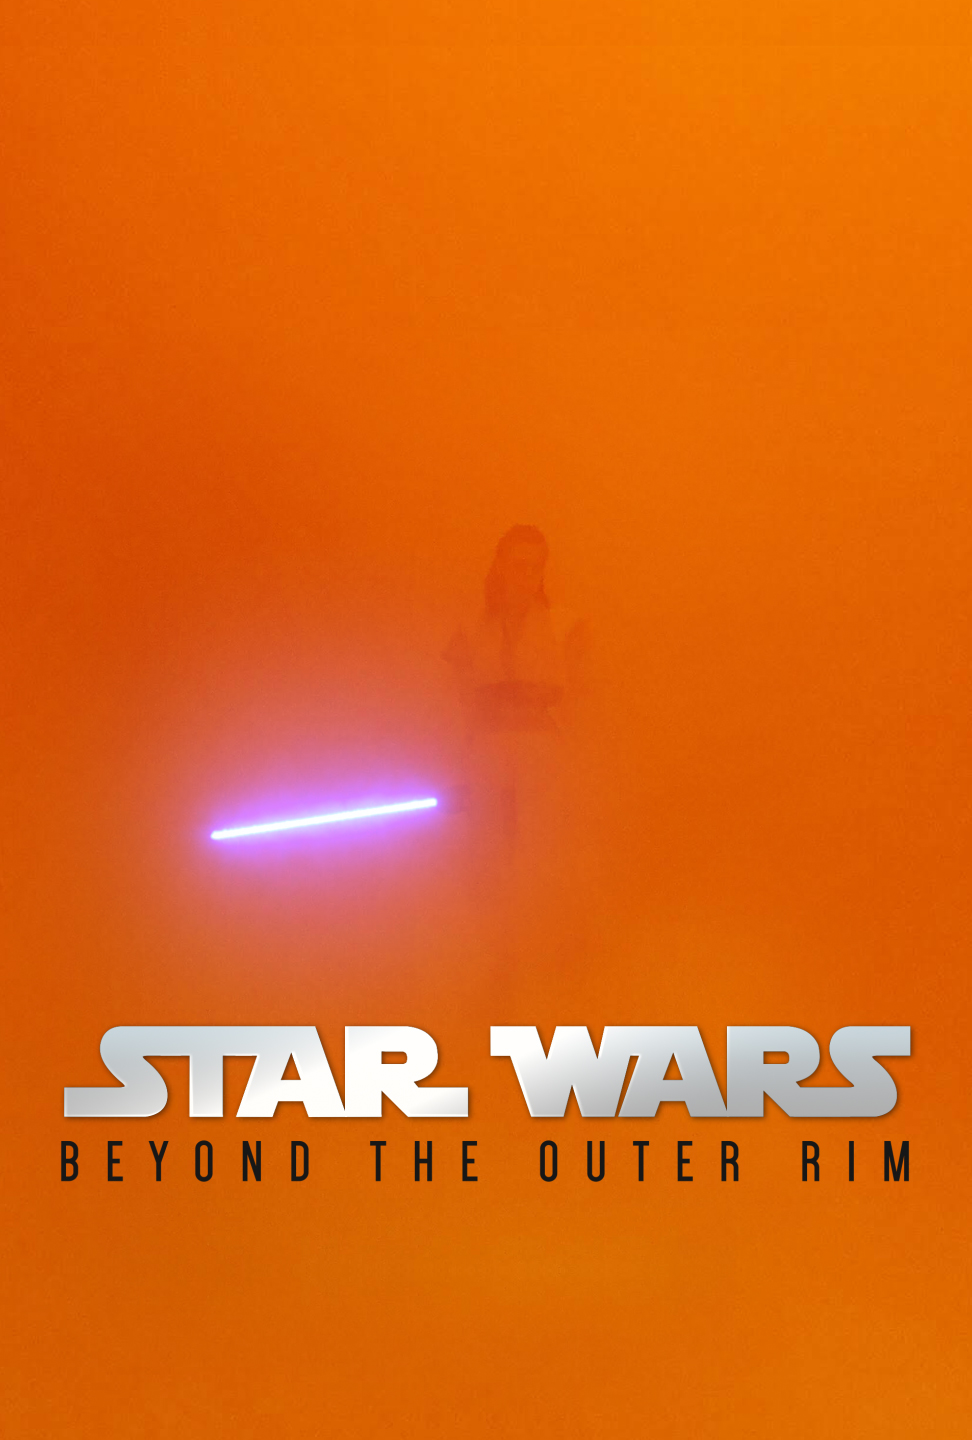 Beyond the Outer Rim